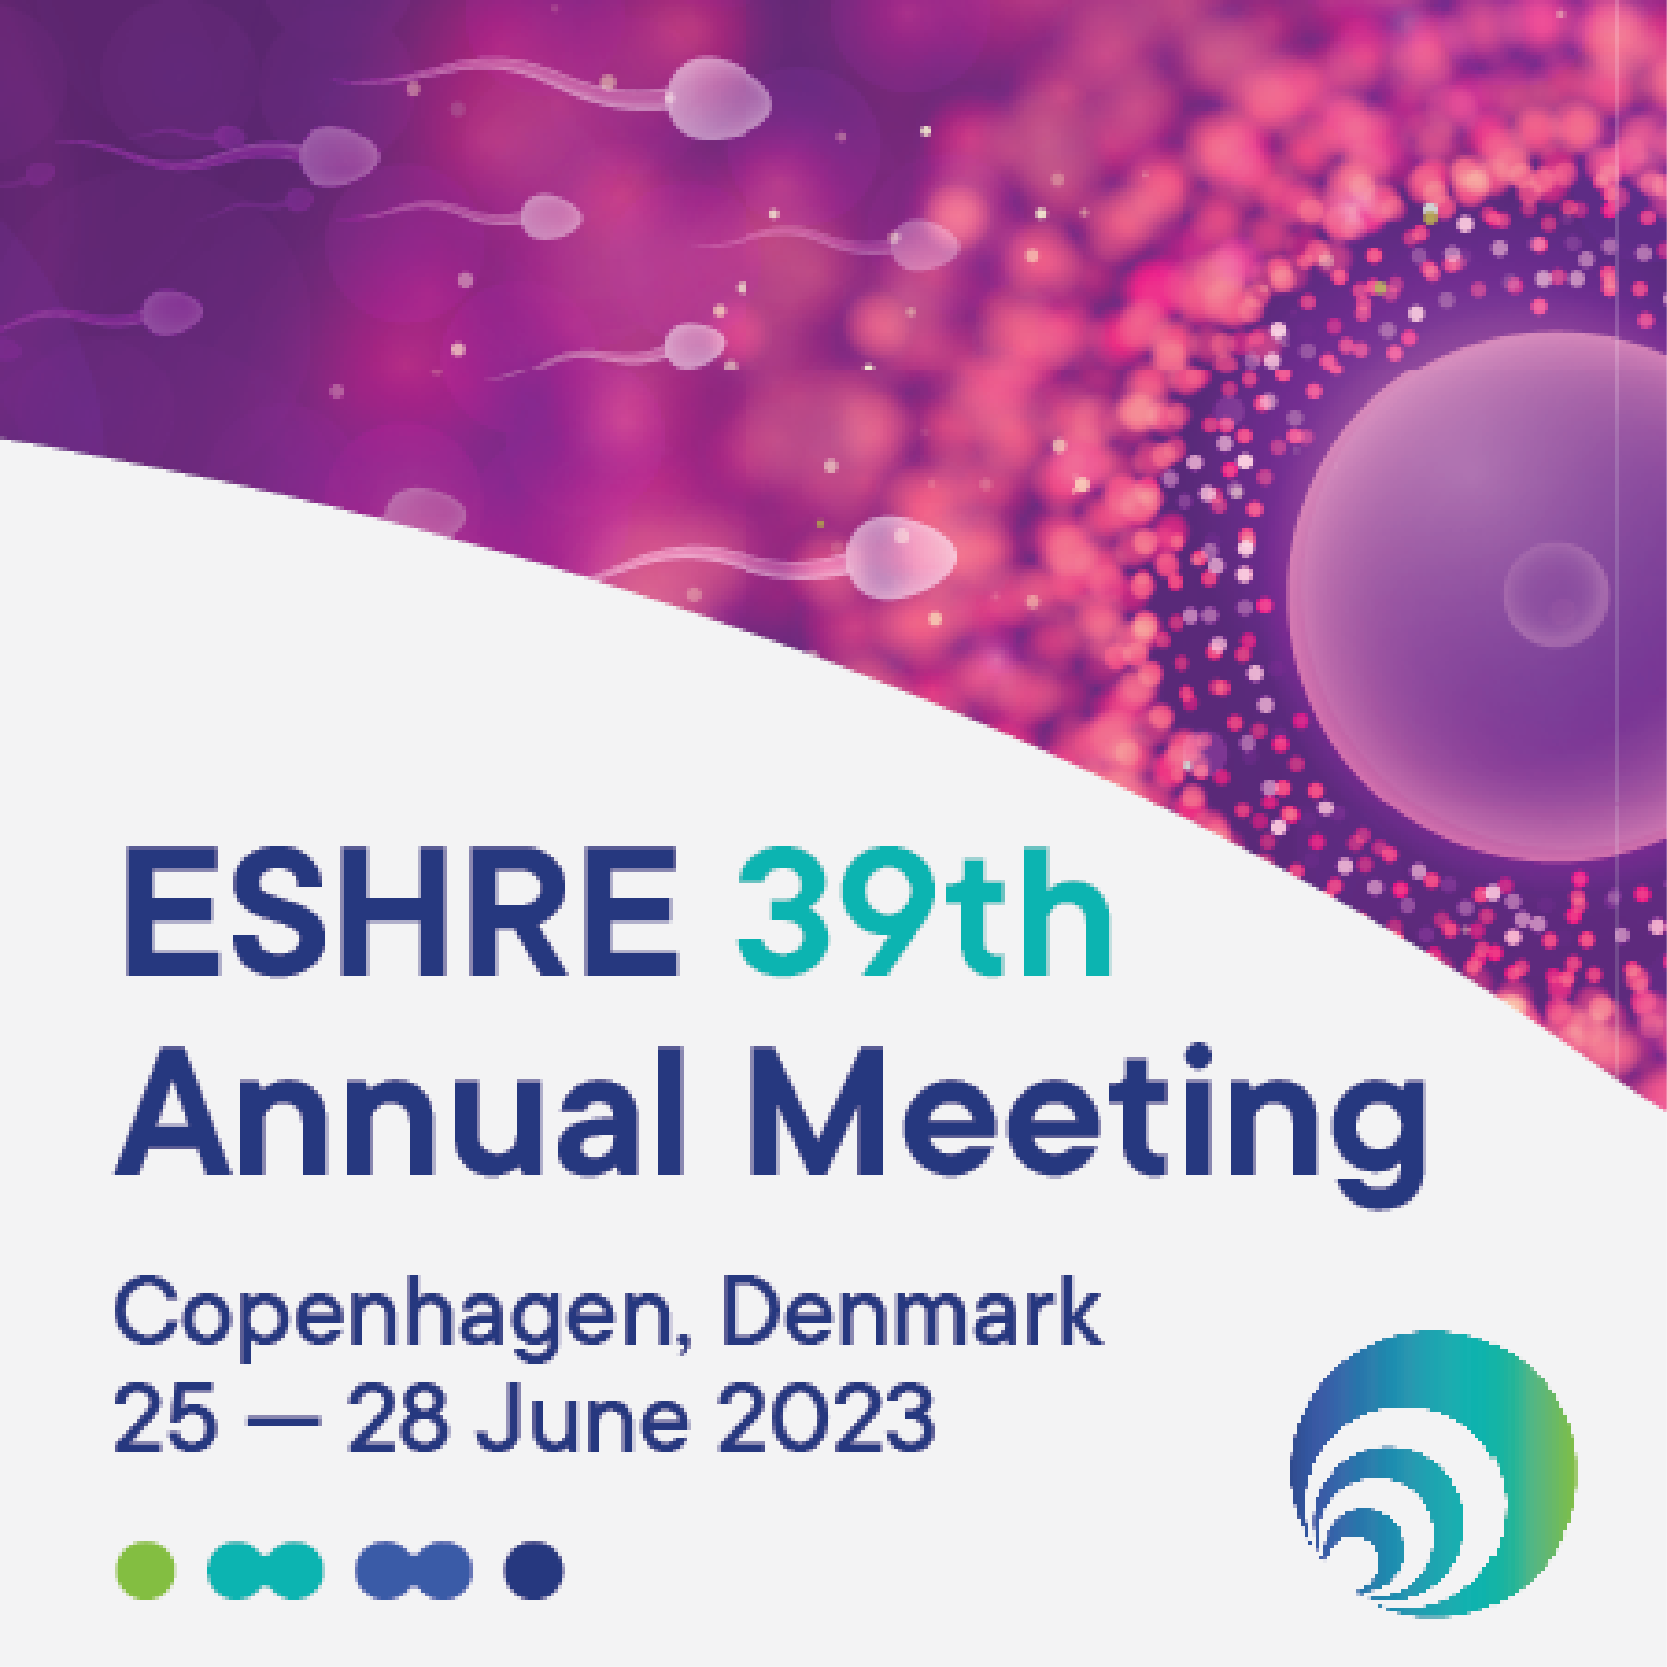 39th Annual Meeting European Society of Human Reproduction and Embryology - ESHRE 2023